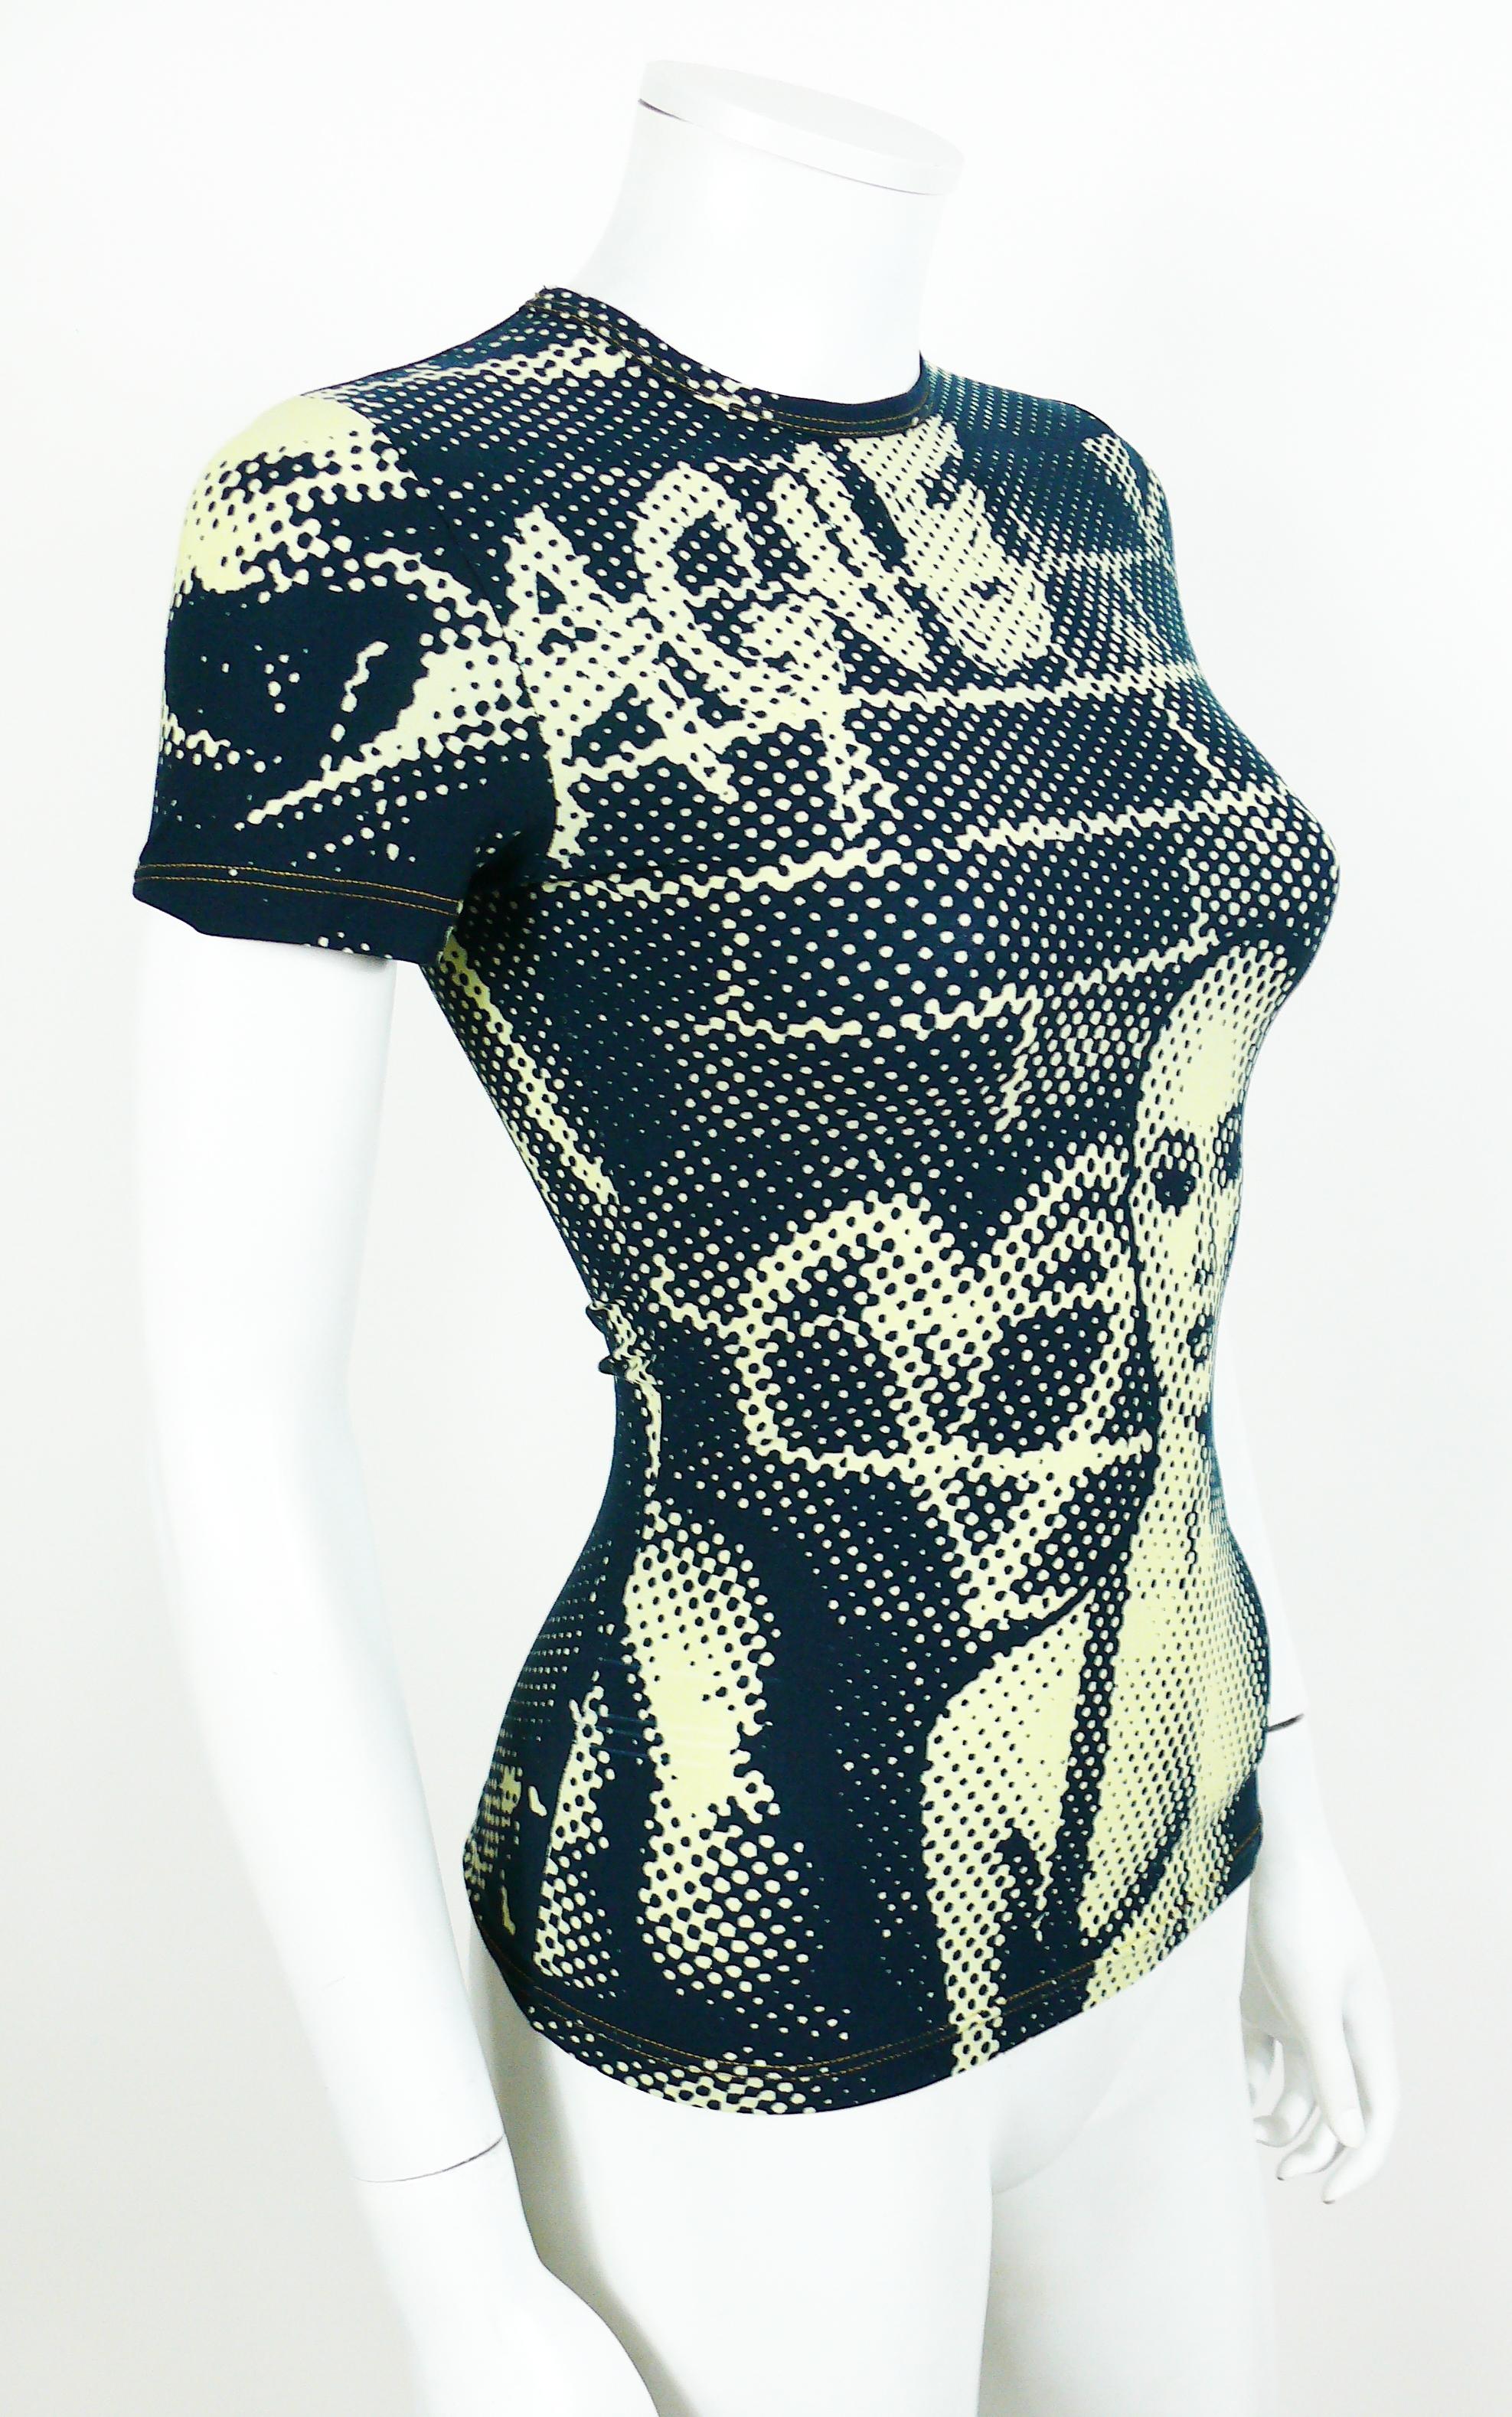 JEAN PAUL GAULTIER vintage shirt from the Fight Racism Collection featuring a dark blue and green/yellow optical illusion print.

Round neck.
Short sleeves.
Stretchy material.

Label reads GAULTIER JEAN'S.
Made in France.

Size tag reads :